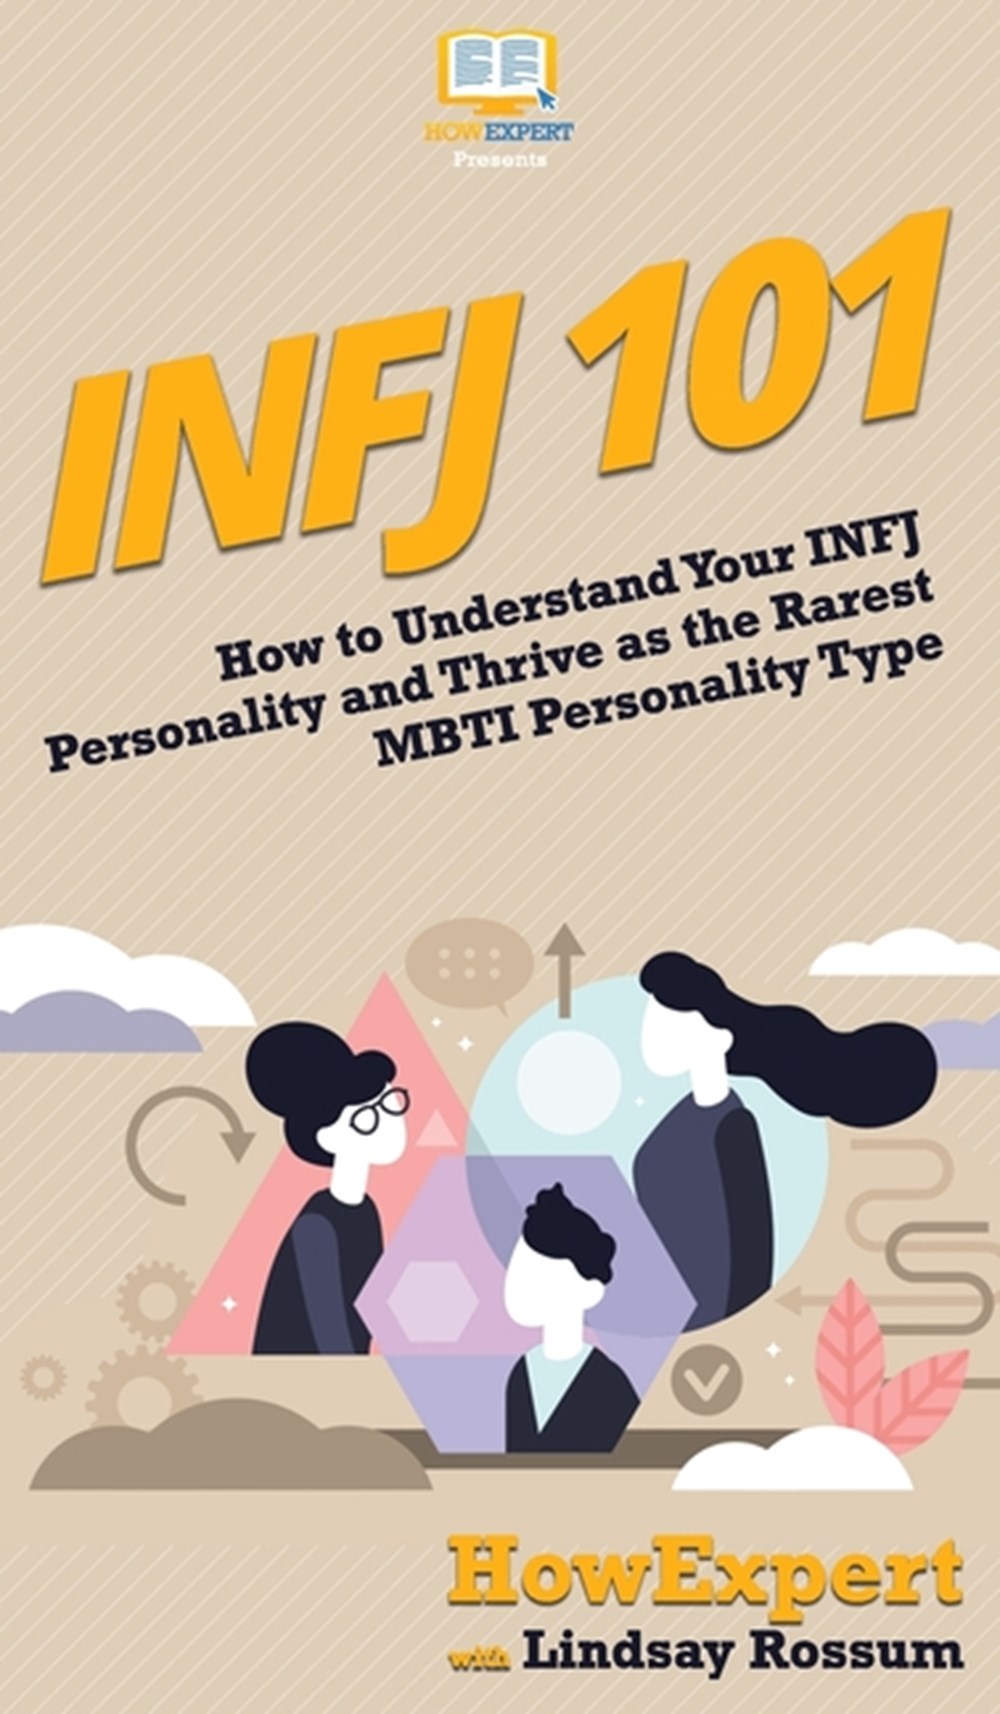 Buy Infj 101 How To Understand Your Infj Personality And Thrive As The Rarest Mbti Personality Type By Howexpert Lindsay Rossum From Porchlight Book Company